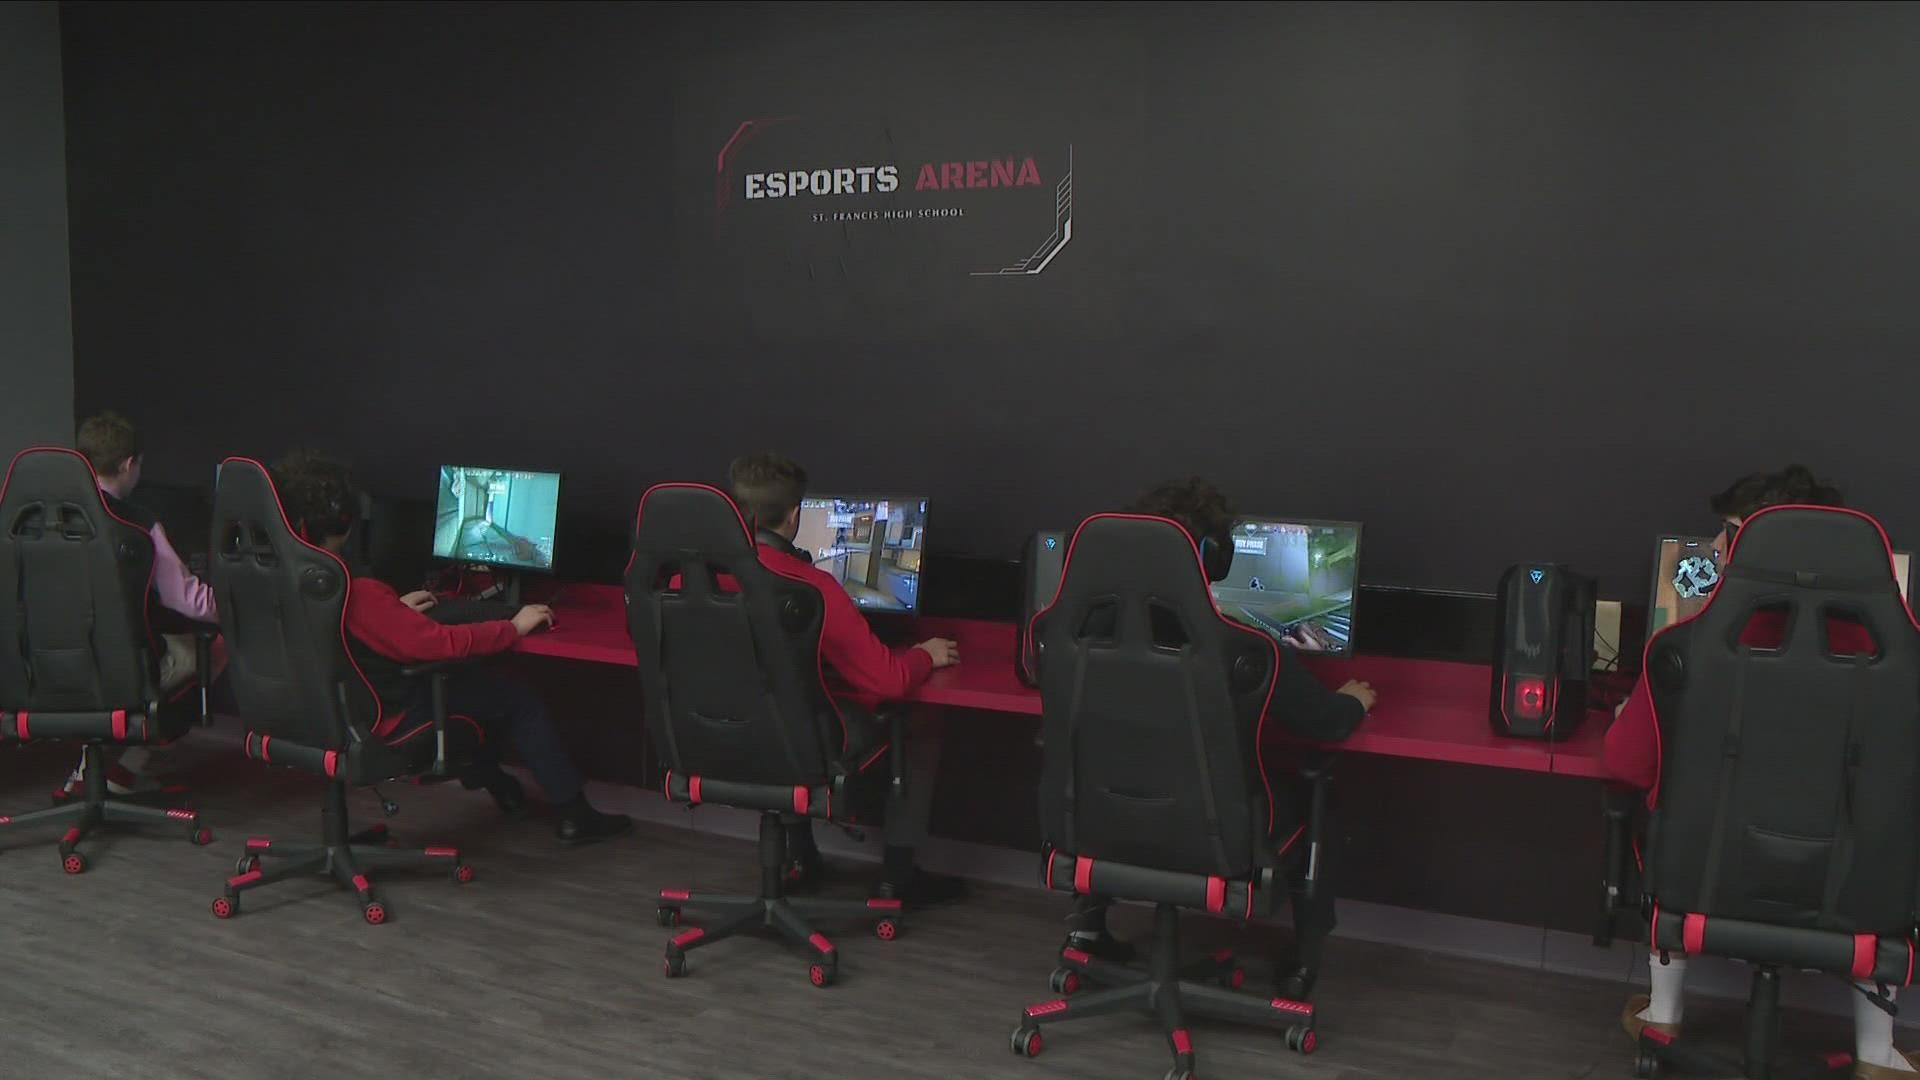 St. Francis H.S. creates video game arena ESPORTS in their school